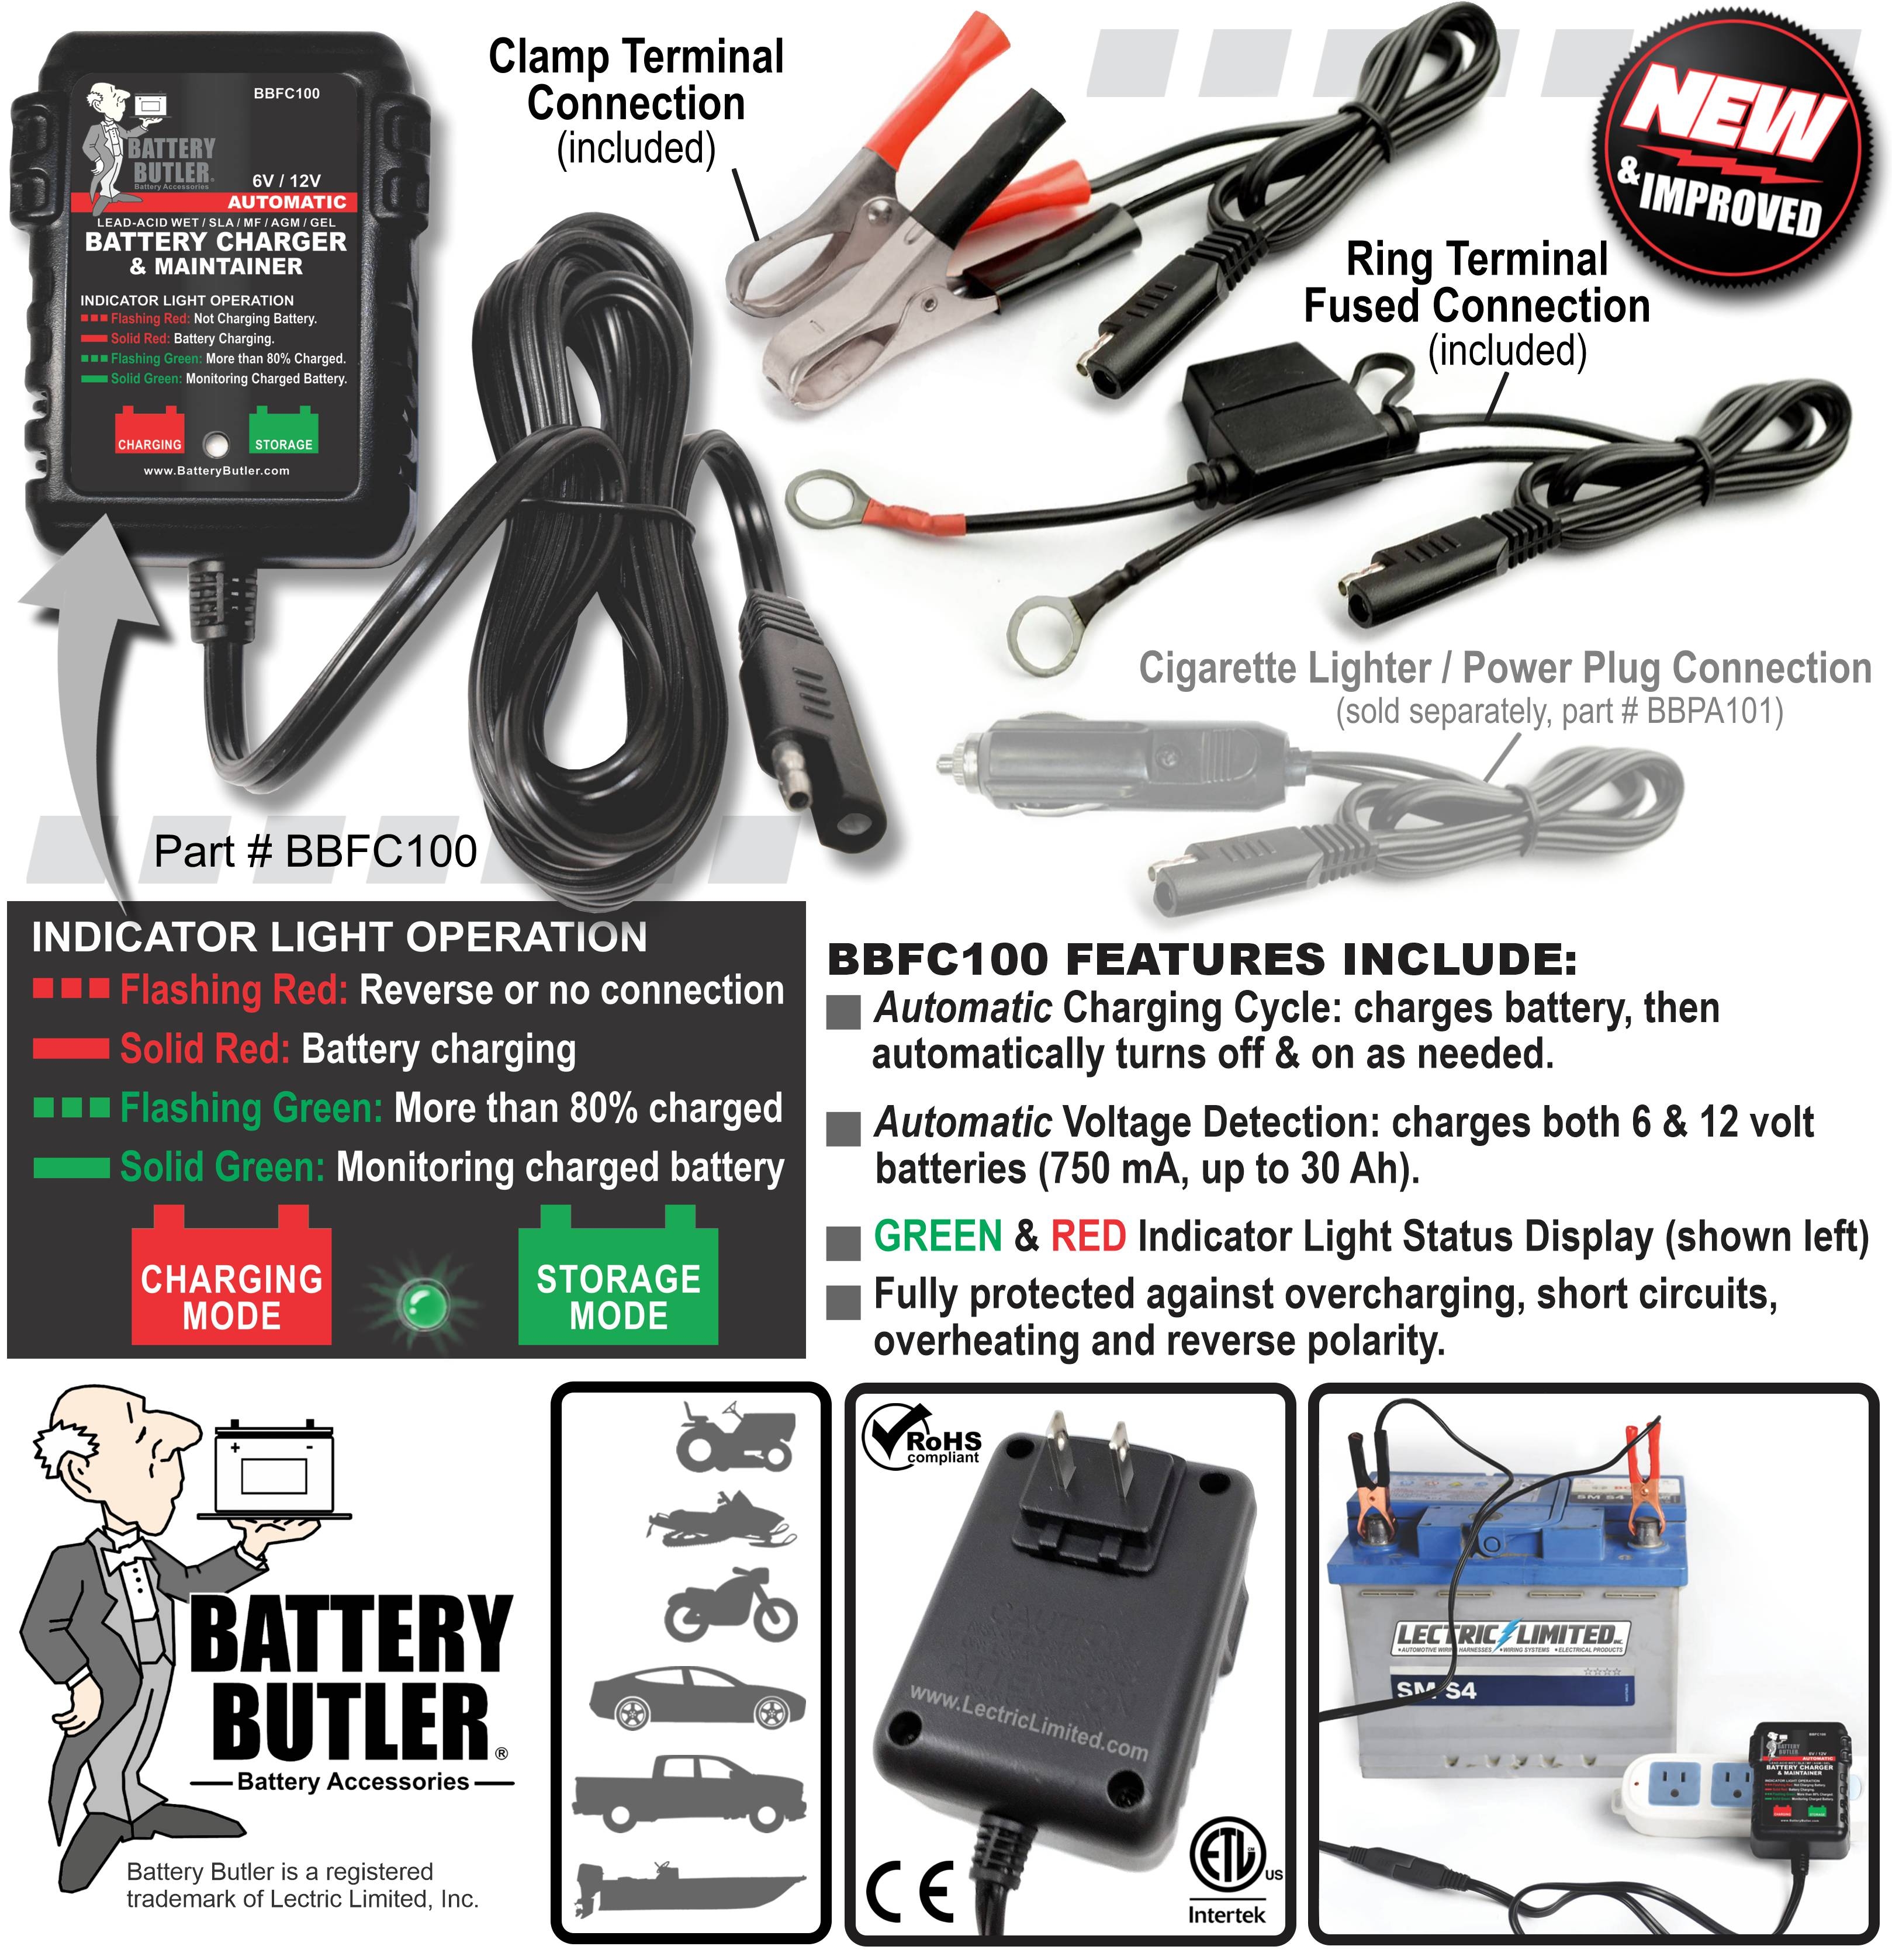 Battery Butler 12 volt automatic storage tender charger w/warranty & free ship ! 